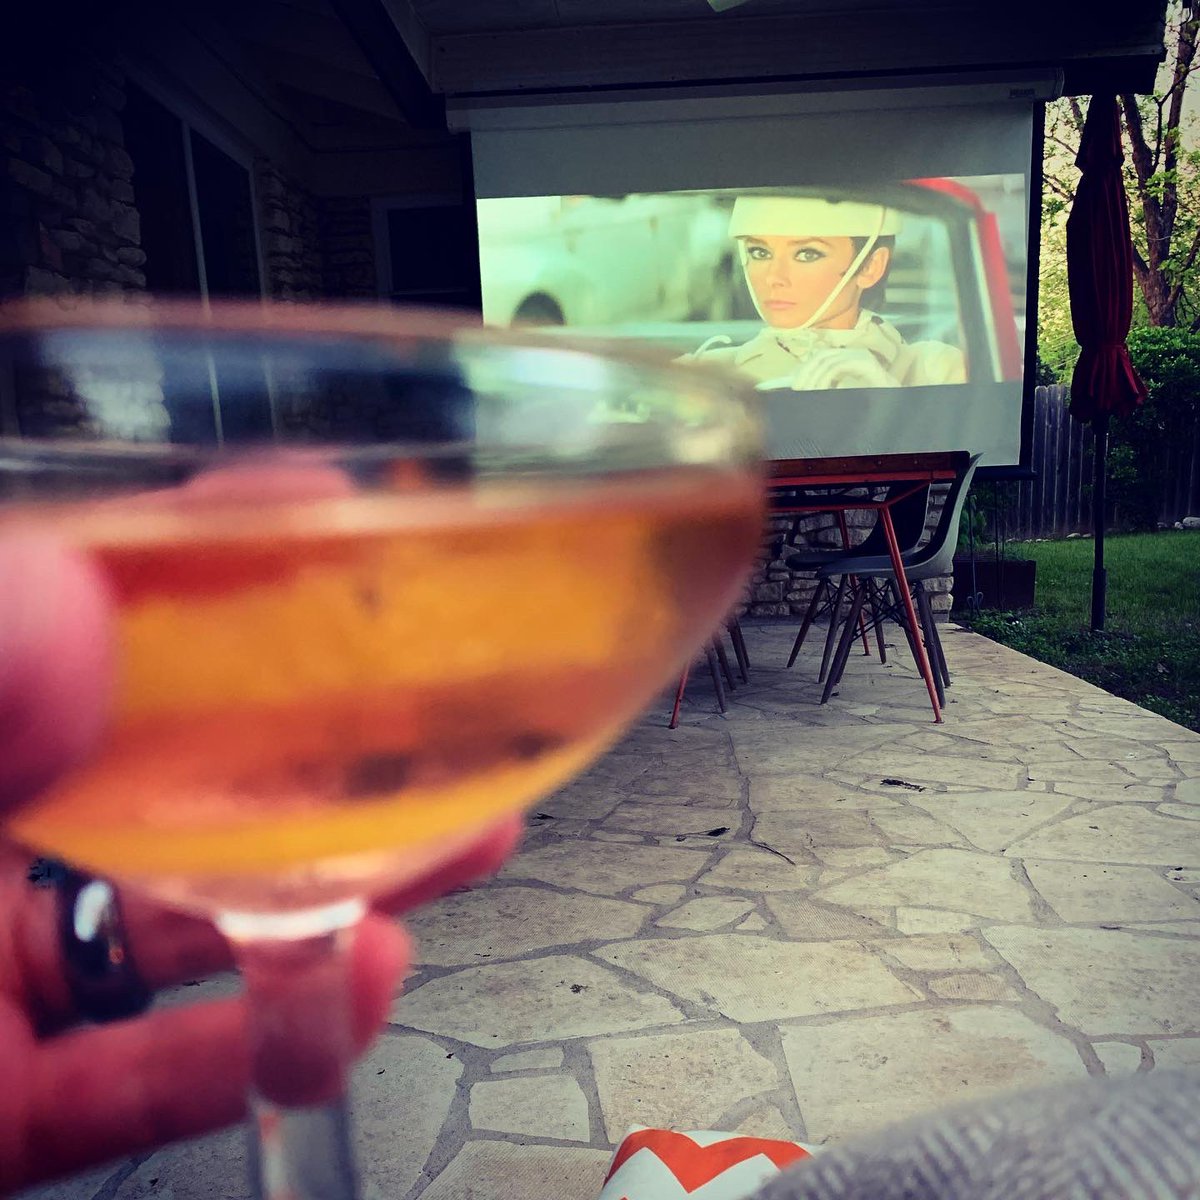 Outdoor Movie Night feat. HOW TO STEAL A MILLION and a Boomerang cocktail (Gin/Vermouth/Maraschino/Angostura). My favorite romantic heist of all time!! 😍 #backyardmovie #GivenchyGoals